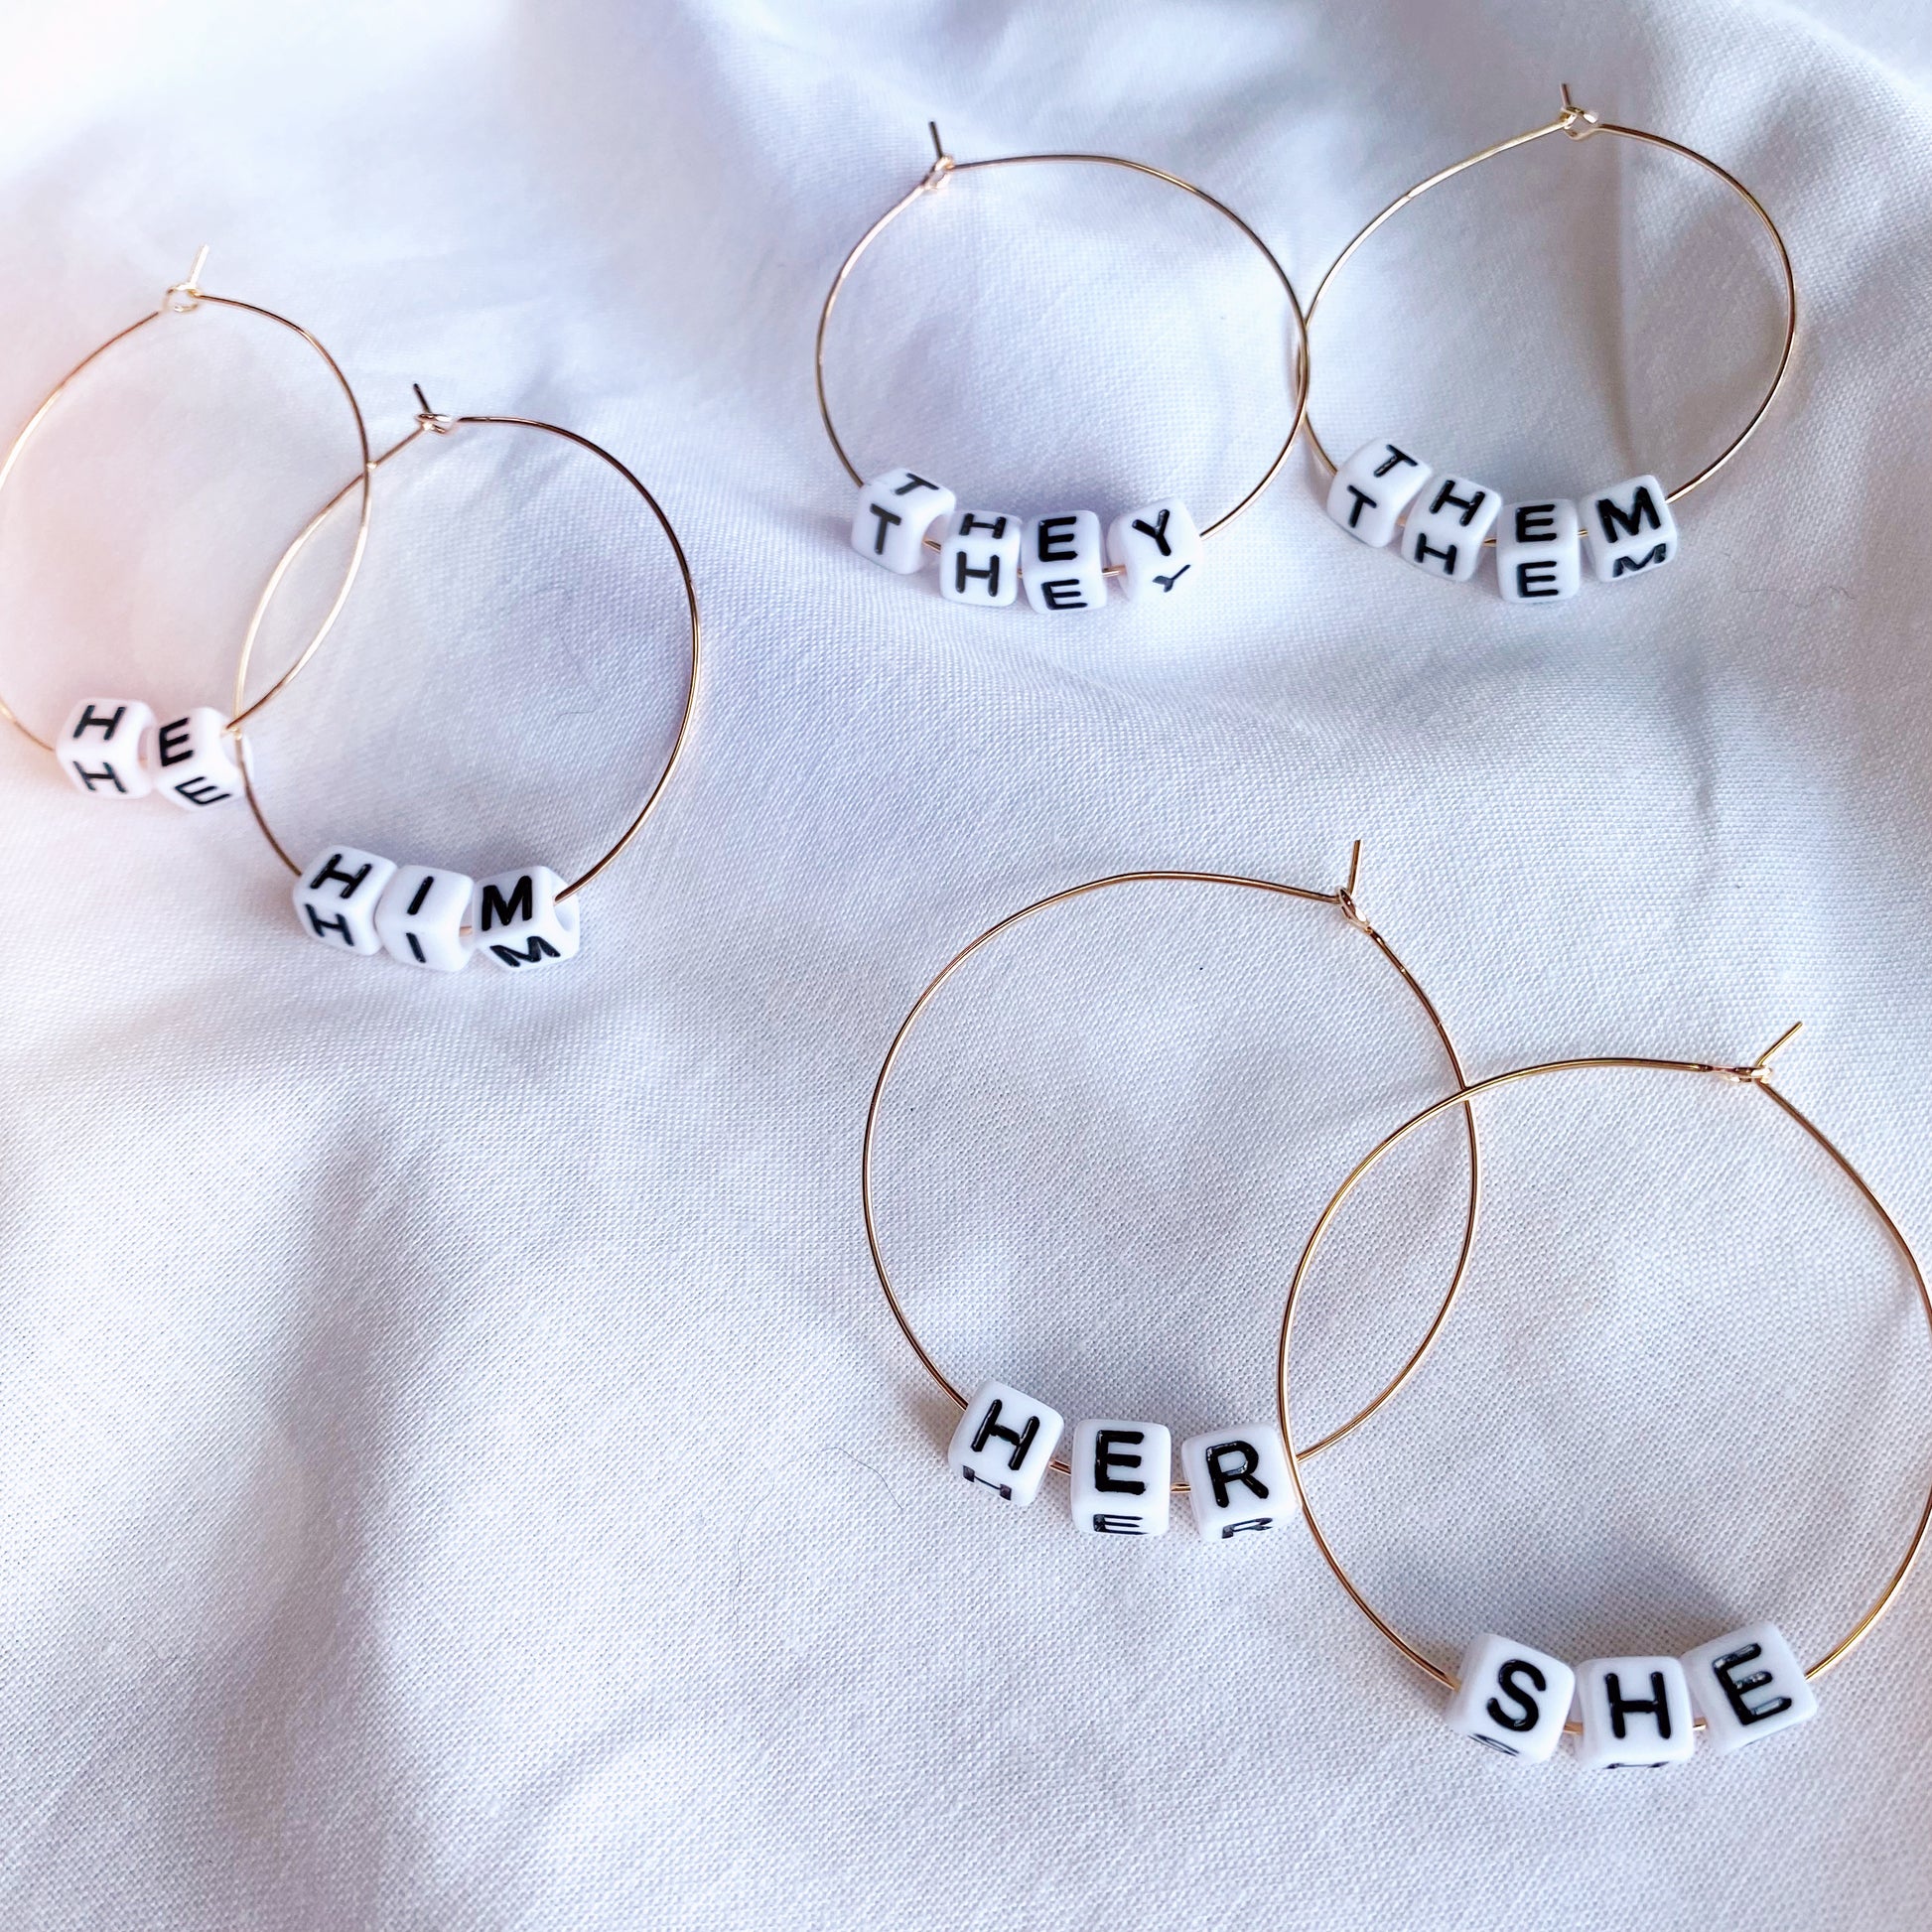 gender pronoun she him they, on gold or silver stainless steel hoops